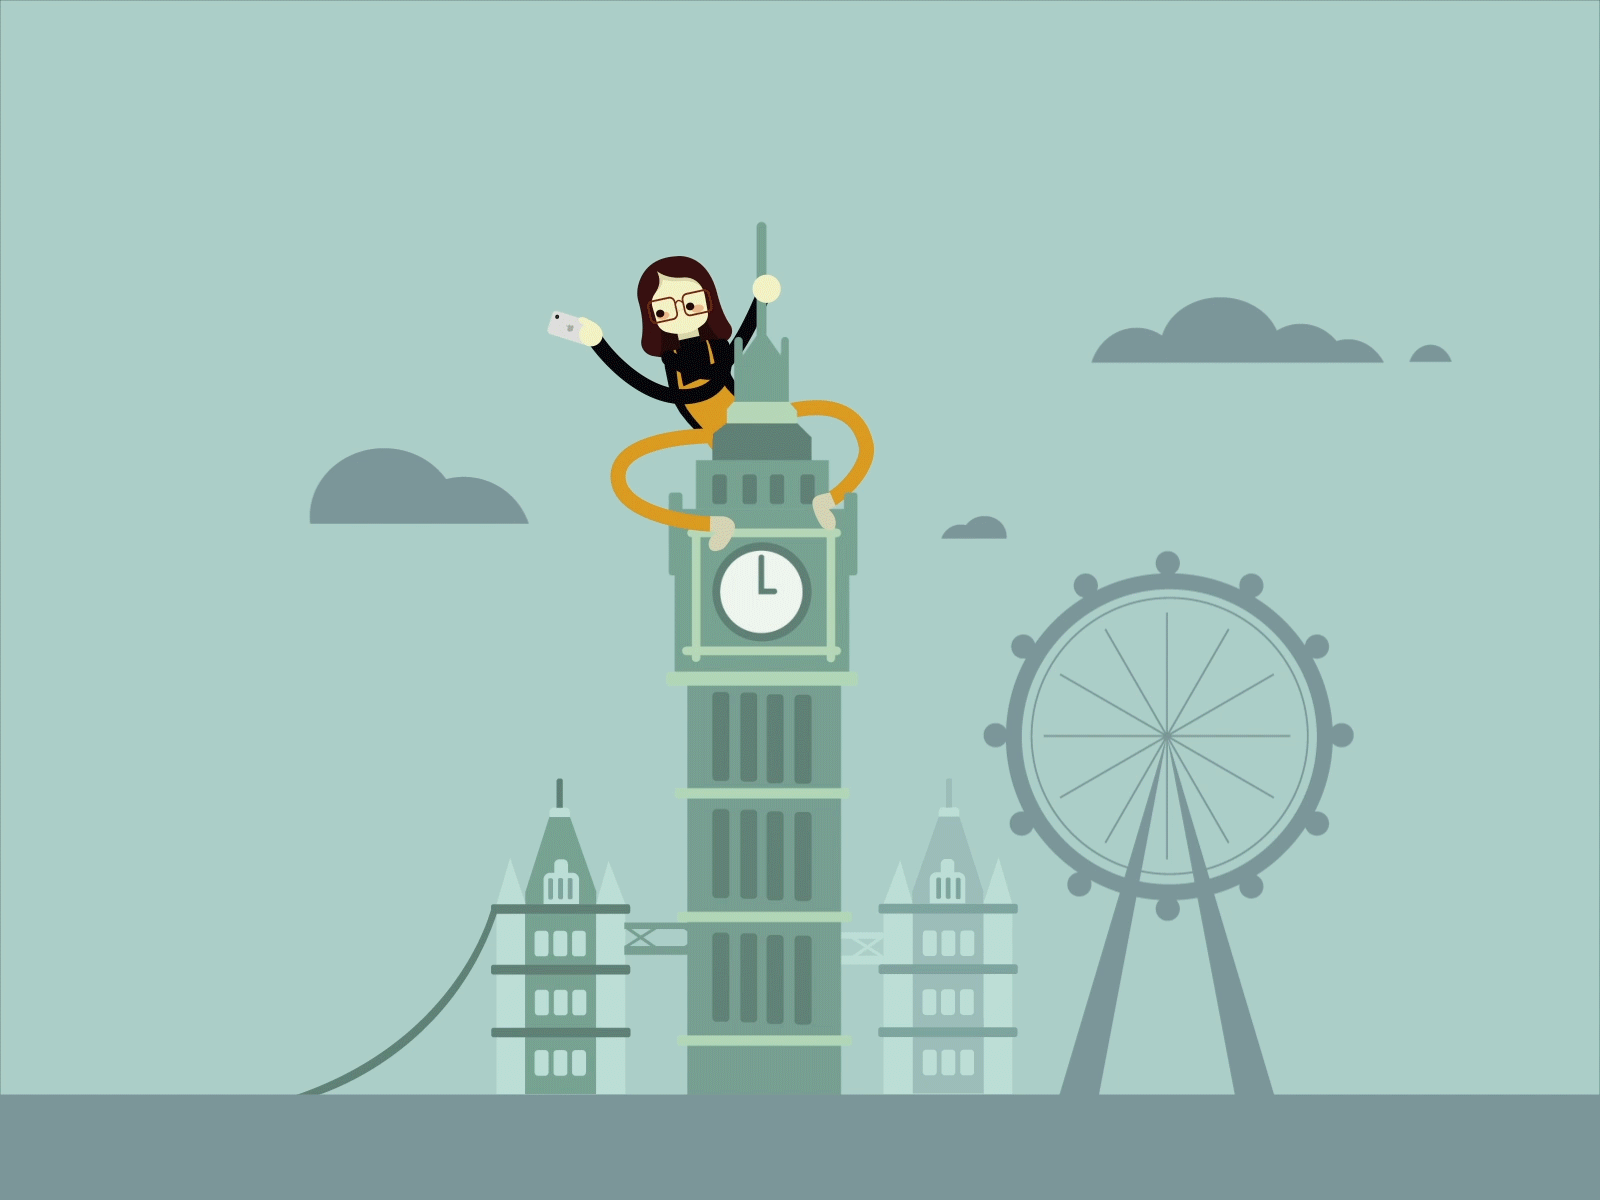 Traveling to London for the first time big ben climbing first time firstshot gif illustration london london bridge london eye selfie traveling vector